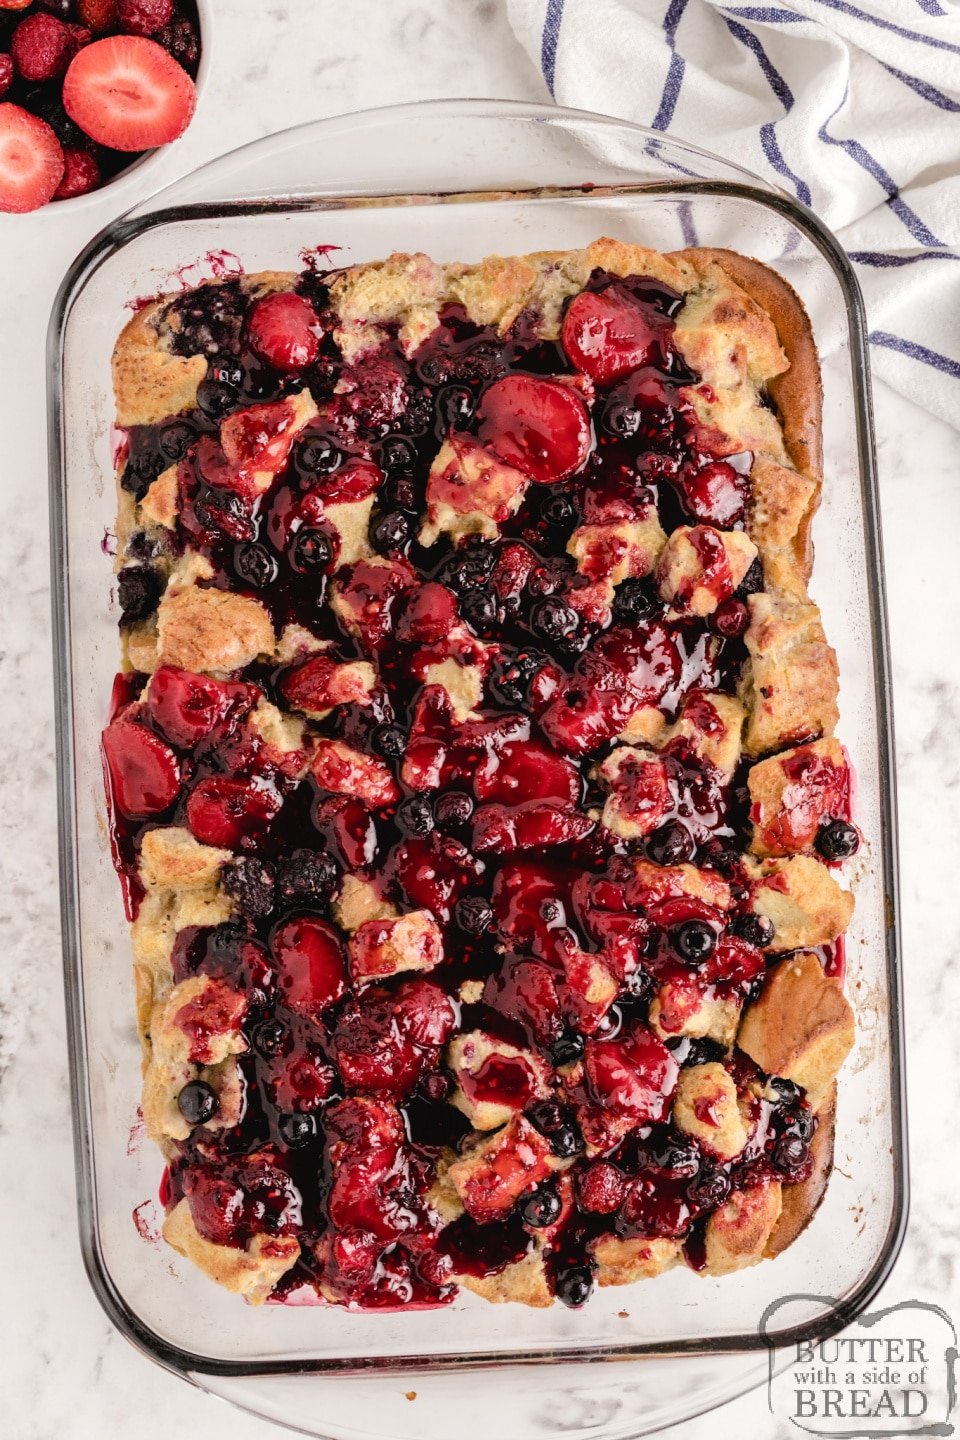 Baked french toast casserole with fresh berries